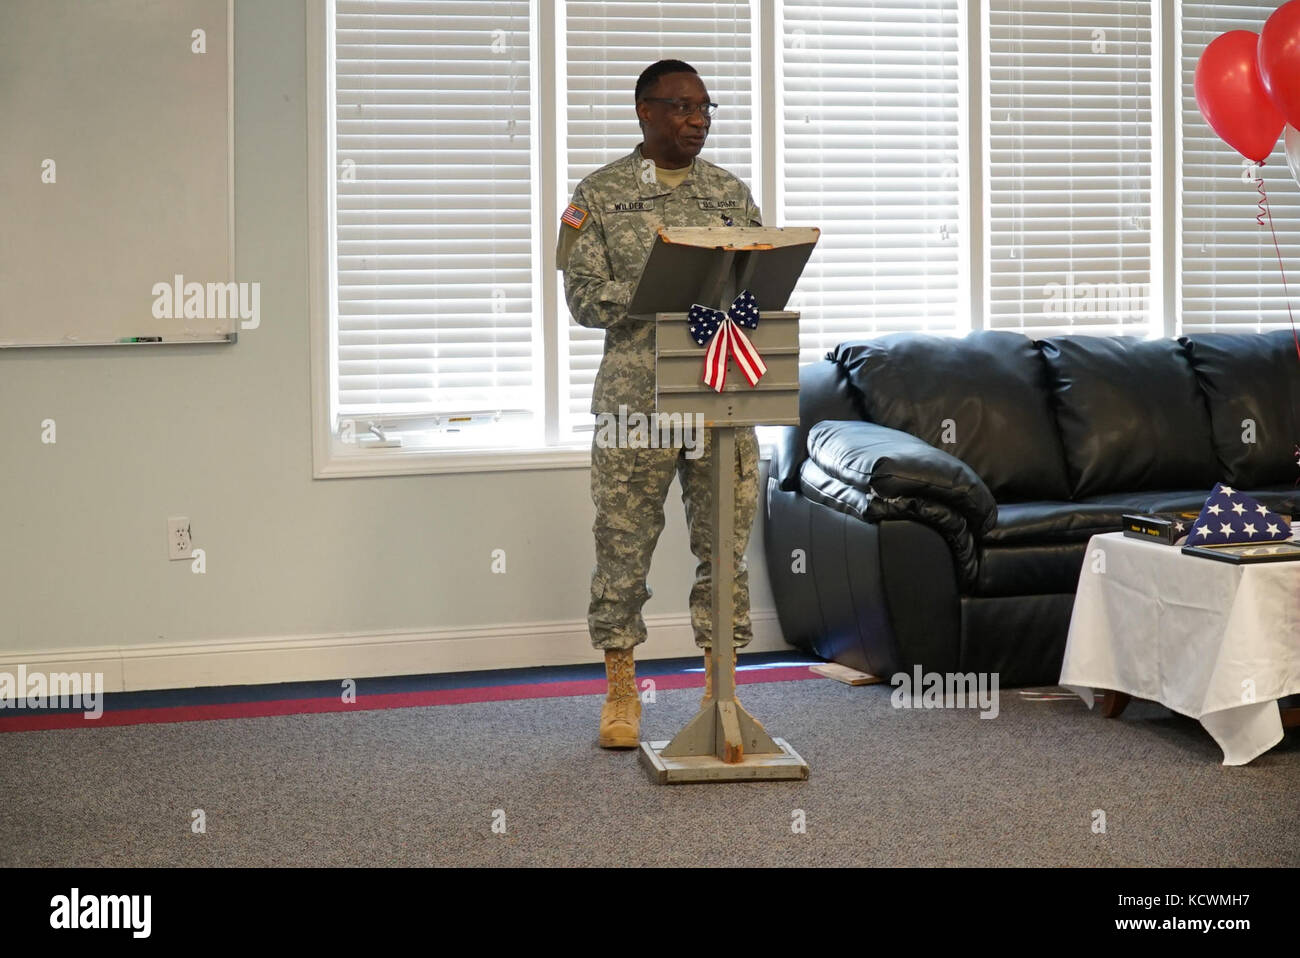 U.S. Army Master Sgt. Theodore Wilder speaks as the South Carolina National Guard recognizes his 37 years of service during a retirement ceremony at McCrady Training Center in Eastover, South Carolina, March 9, 2017. Stock Photo